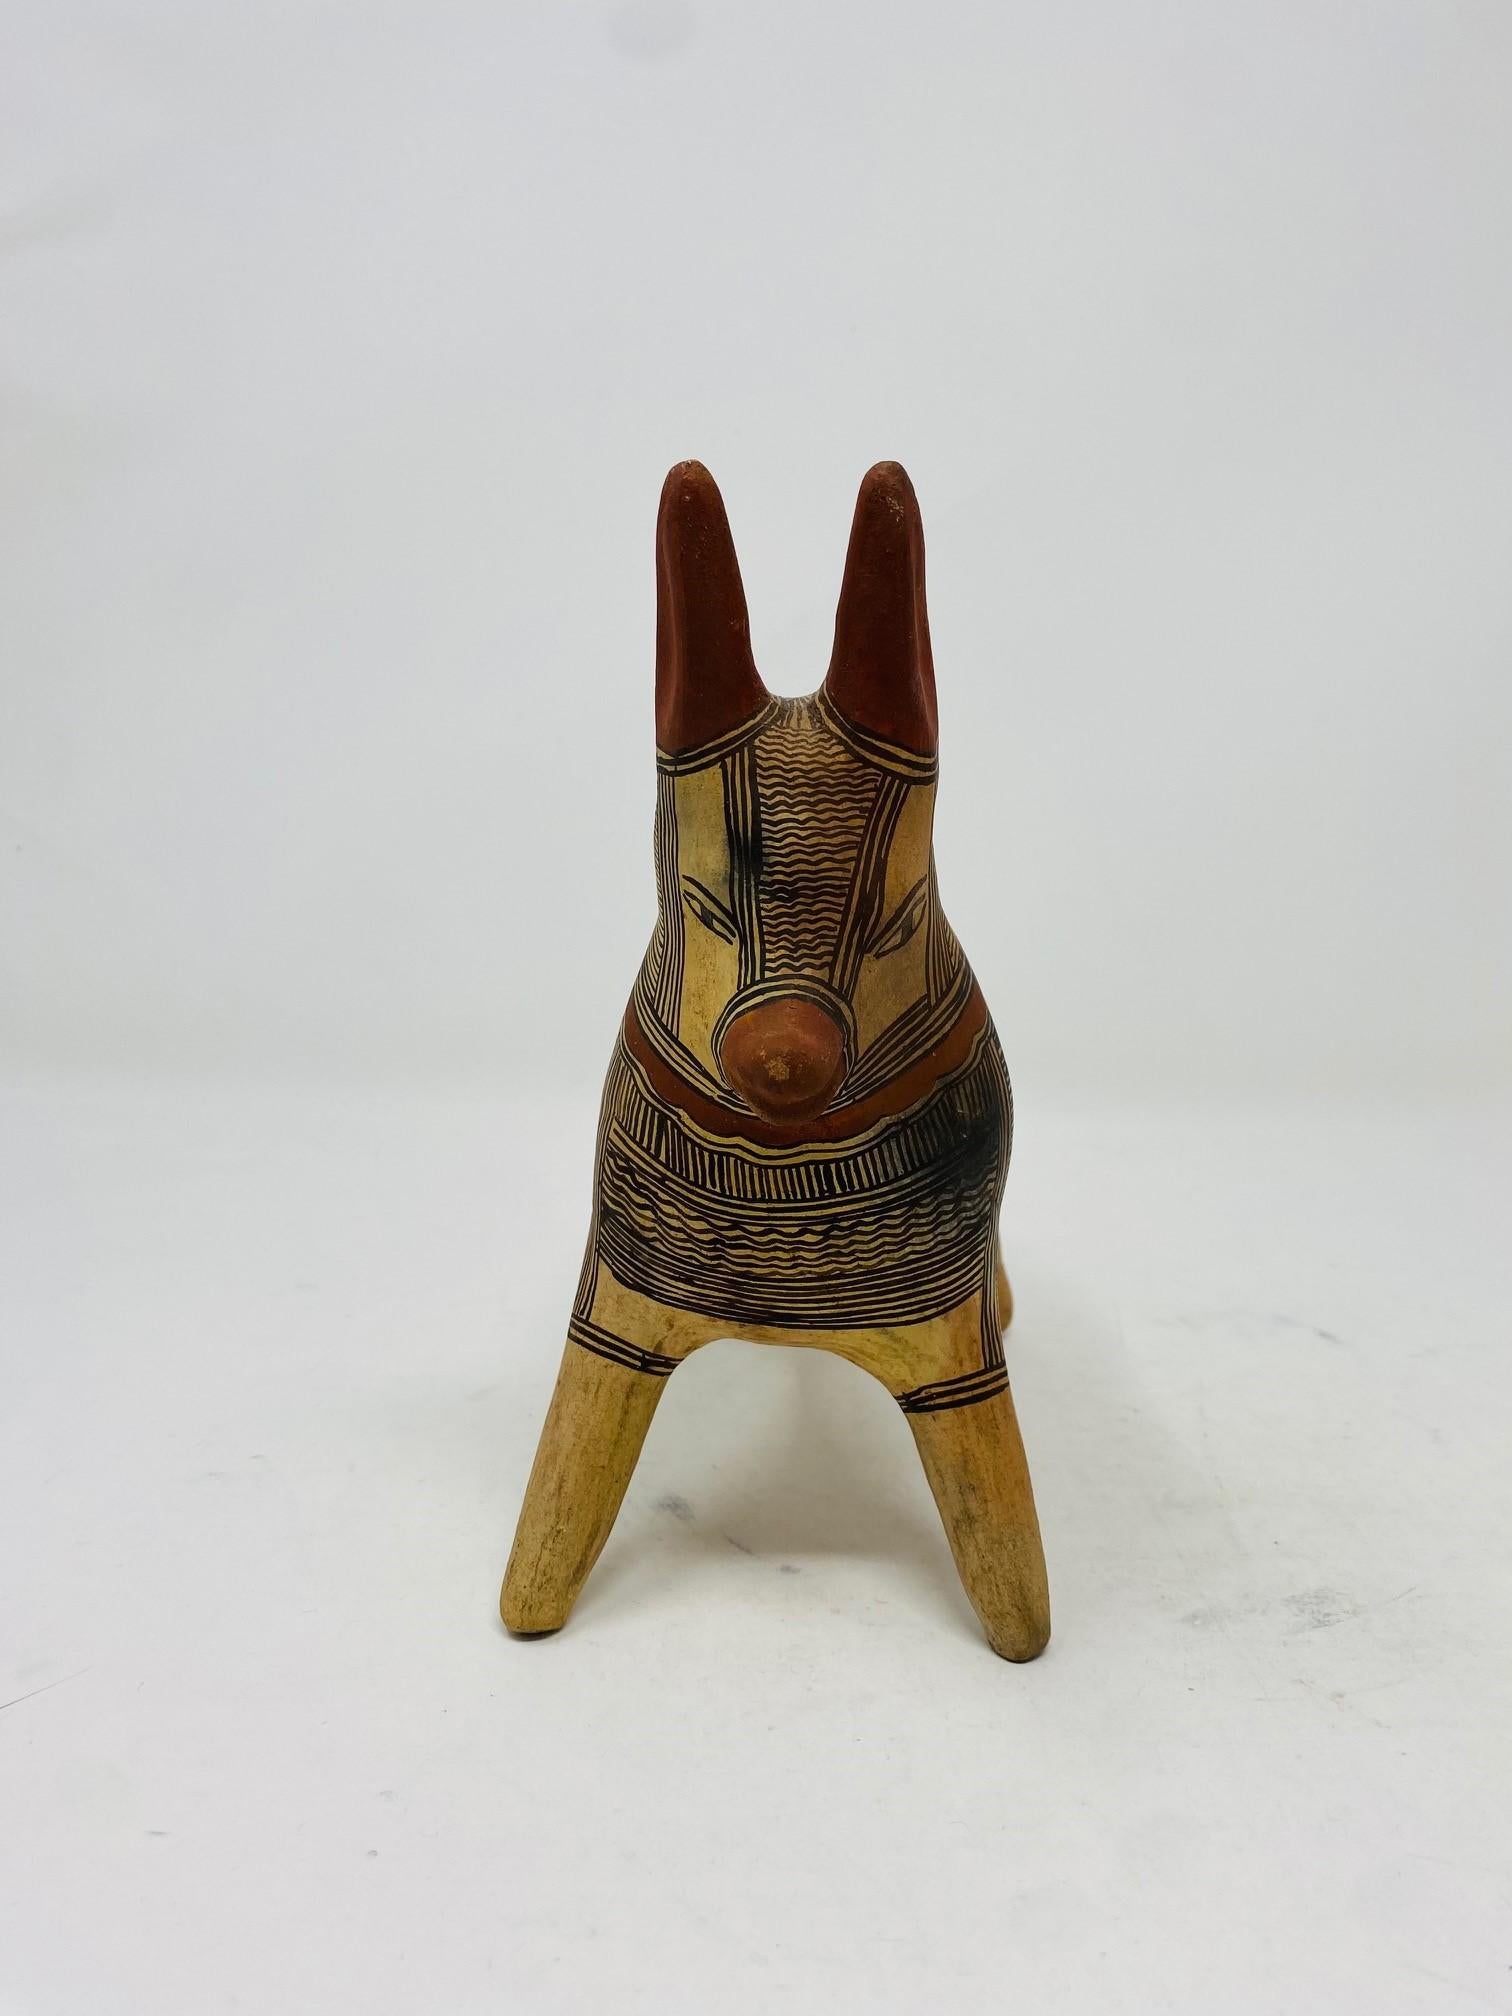 Mid-20th Century Vintage 1960s Mexican Folk Art Pottery Donkey Sculpture For Sale